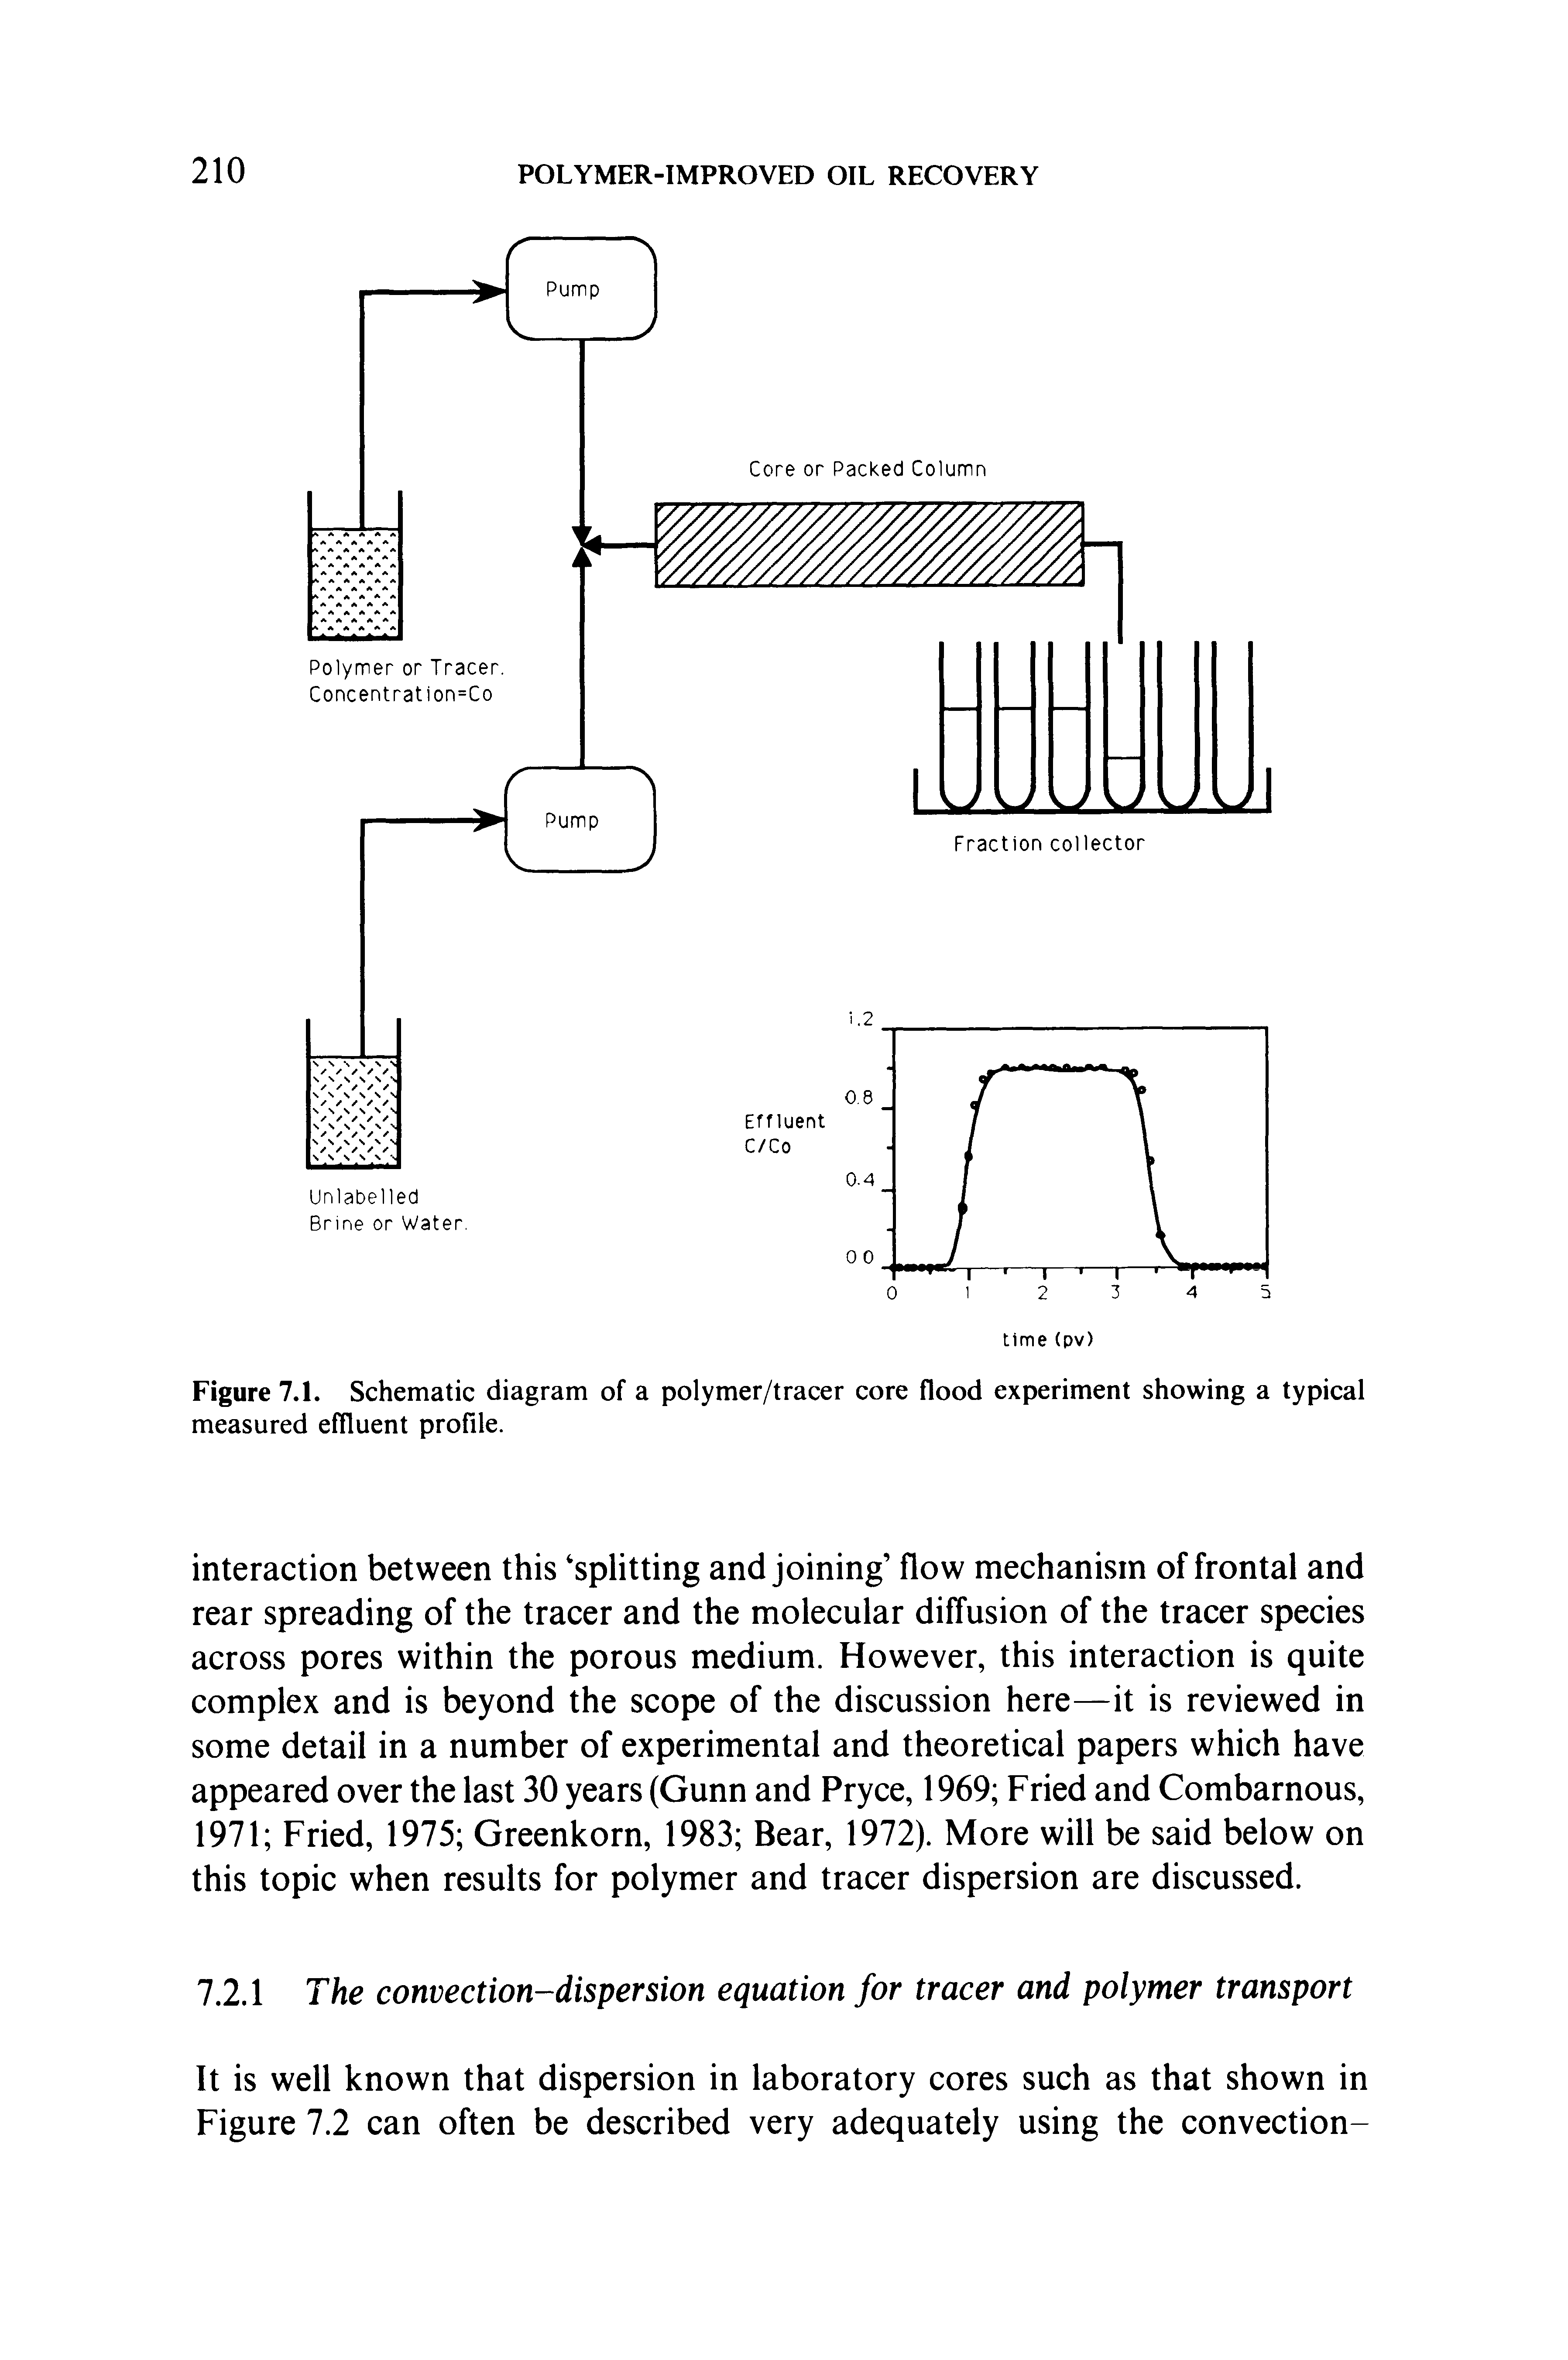 Figure 7.1. Schematic diagram of a polymer/tracer core flood experiment showing a typical measured effluent profile.